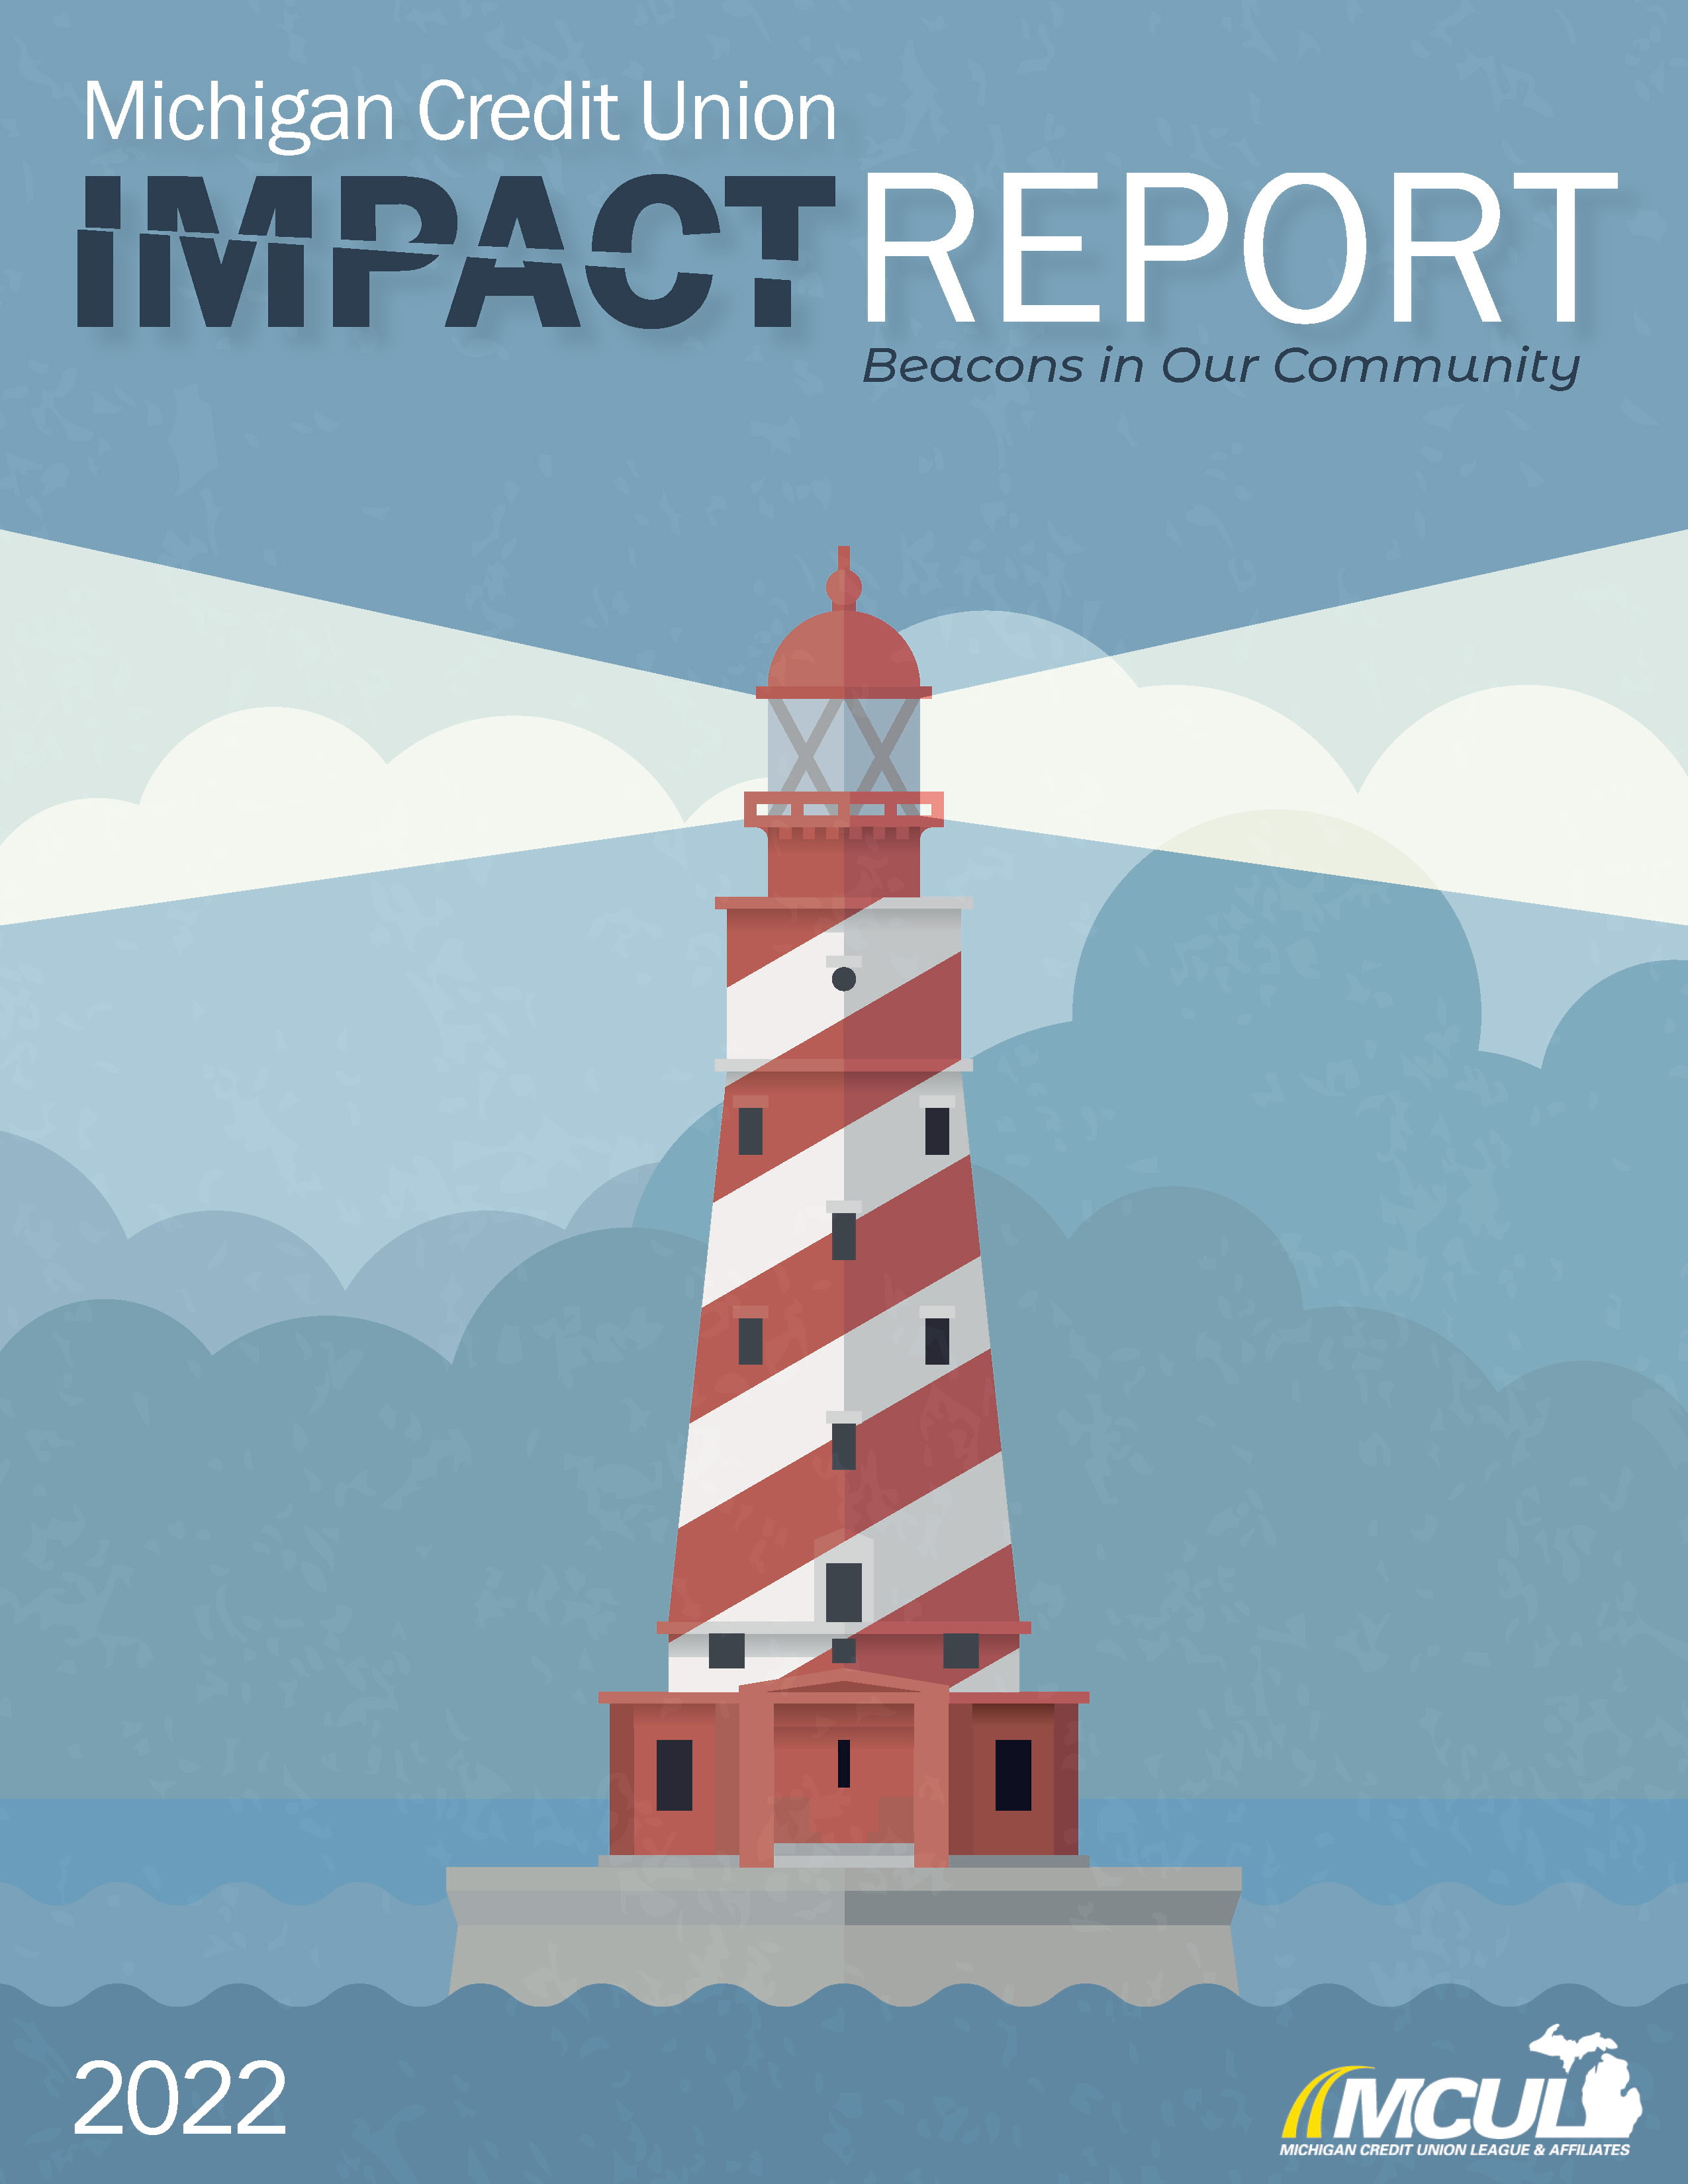 2022 Impact Report Cover